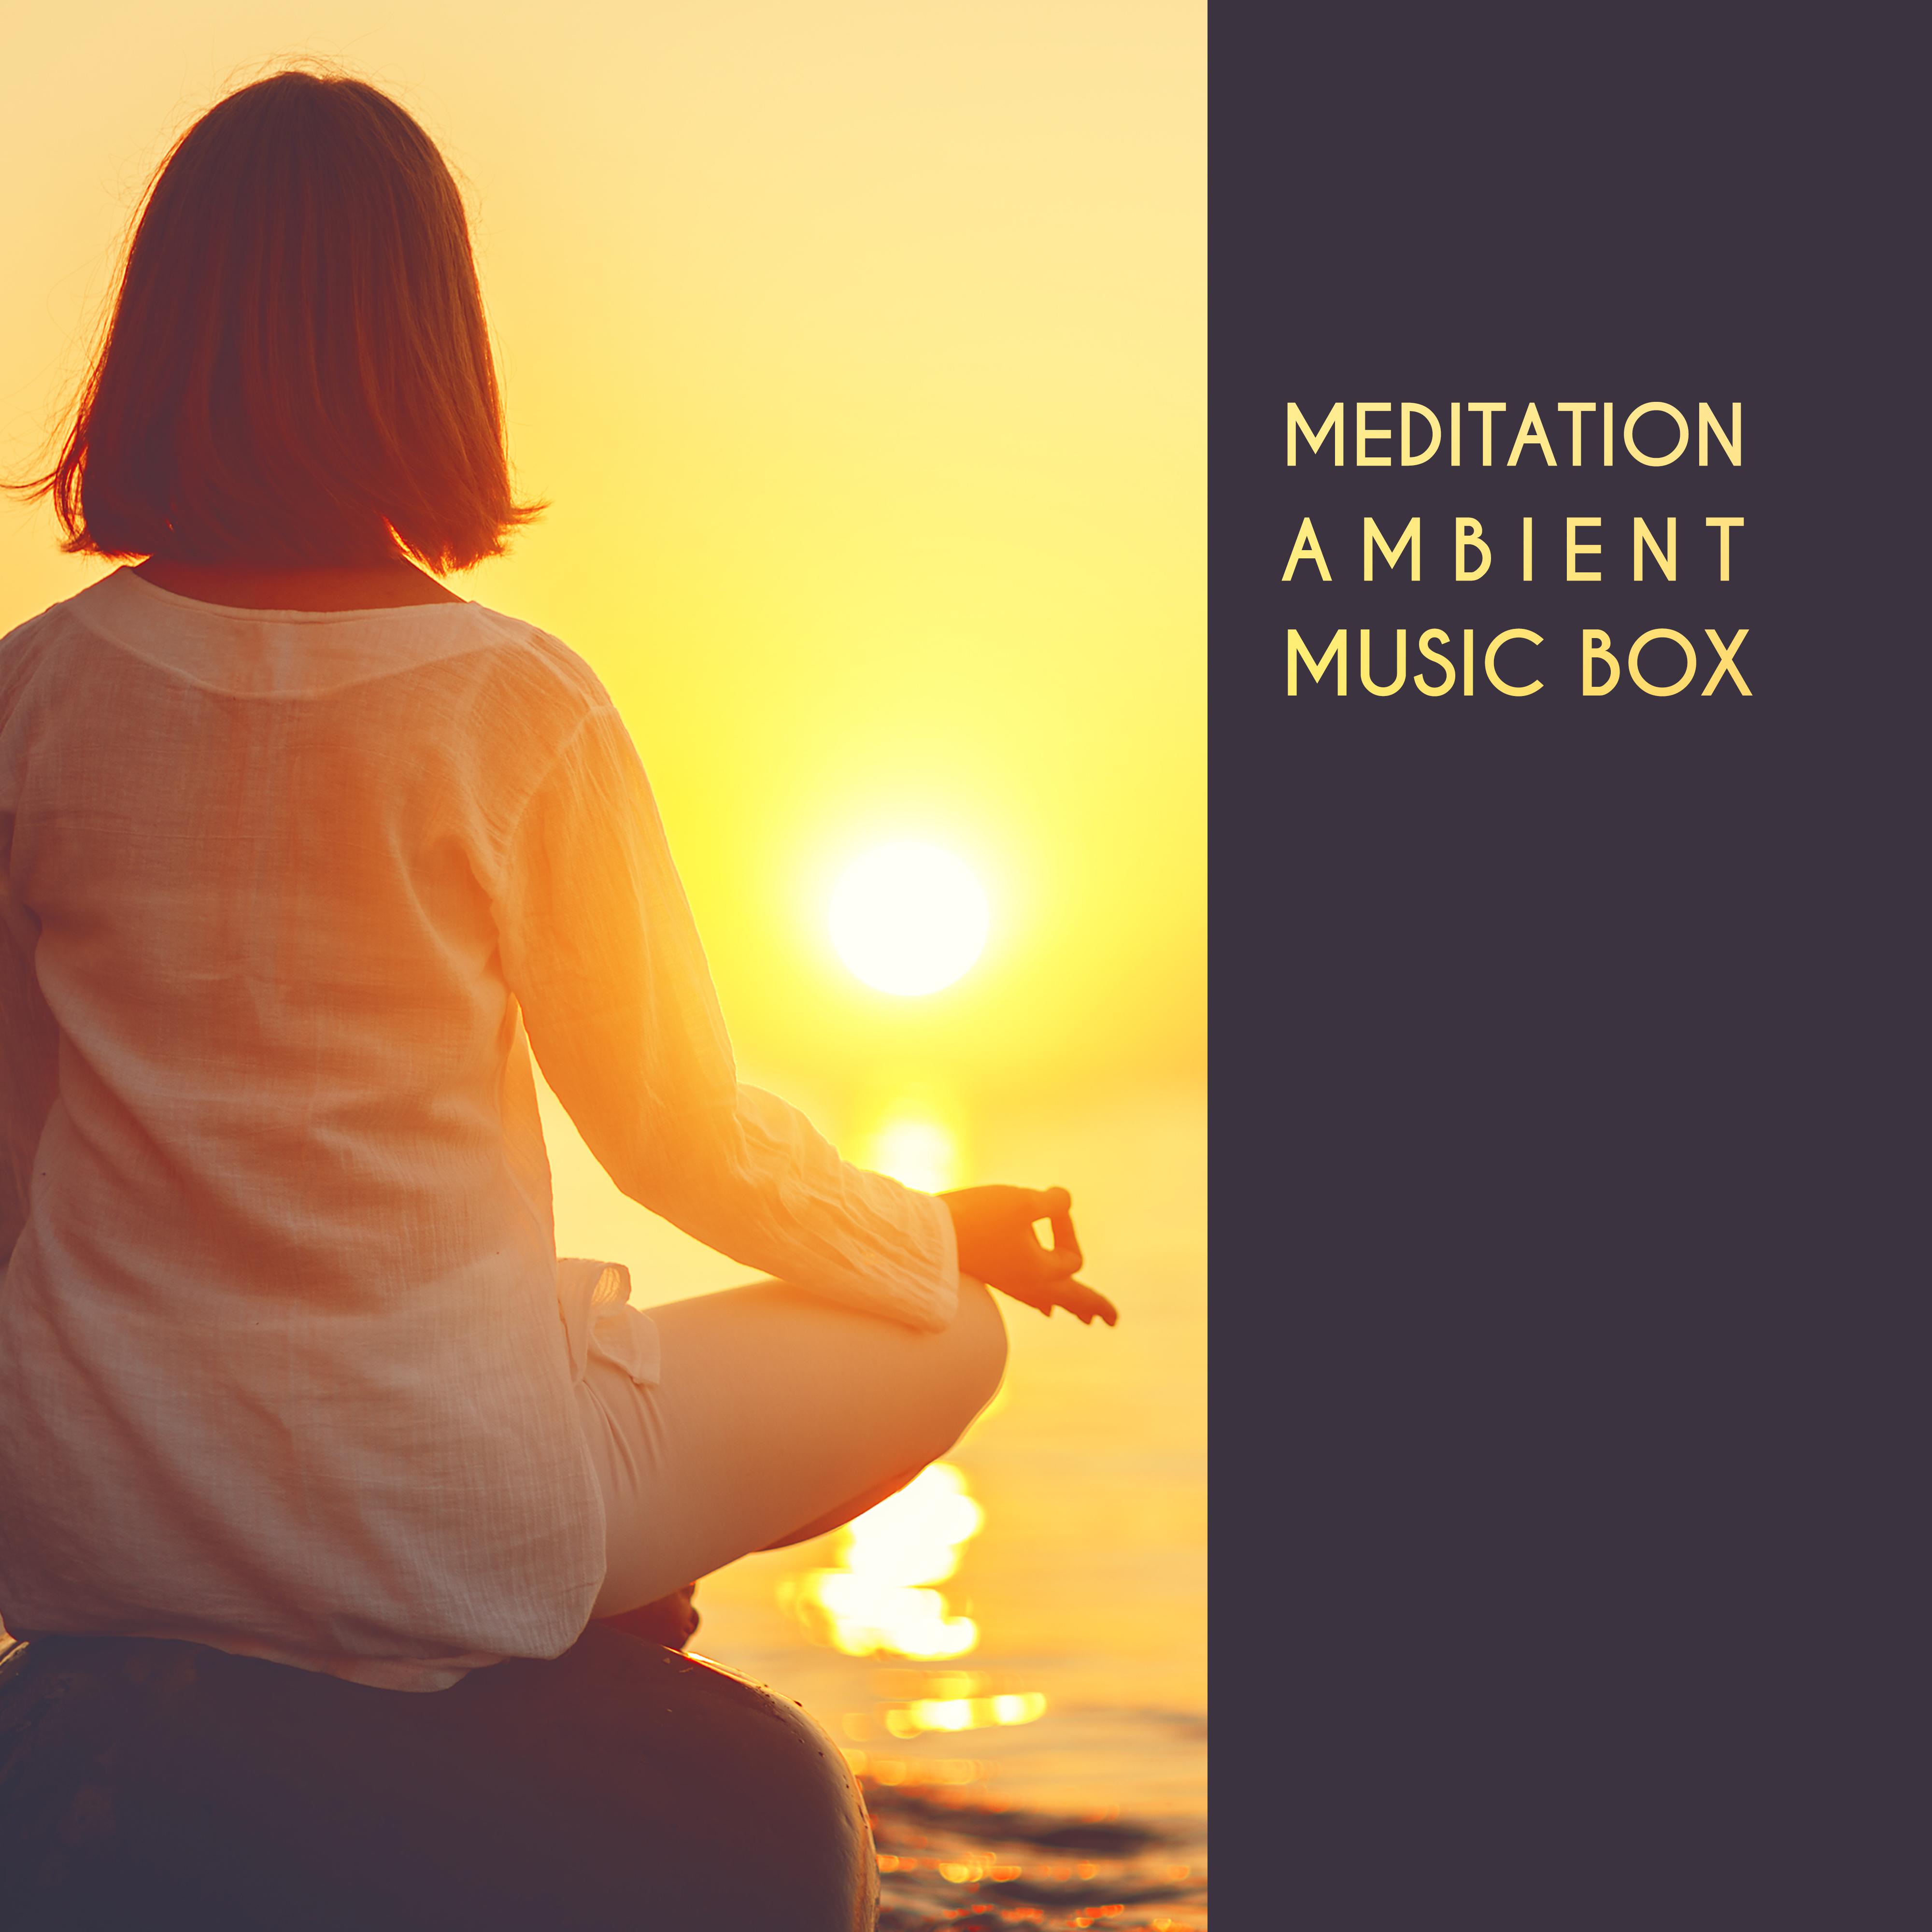 Meditation Ambient Music Box: Compilation of Fresh 2019 New Age Music for Deep Yoga Contemplation & Relax, Body & Soul Improve Connection, Life Energy Increase, Balancing Chakras